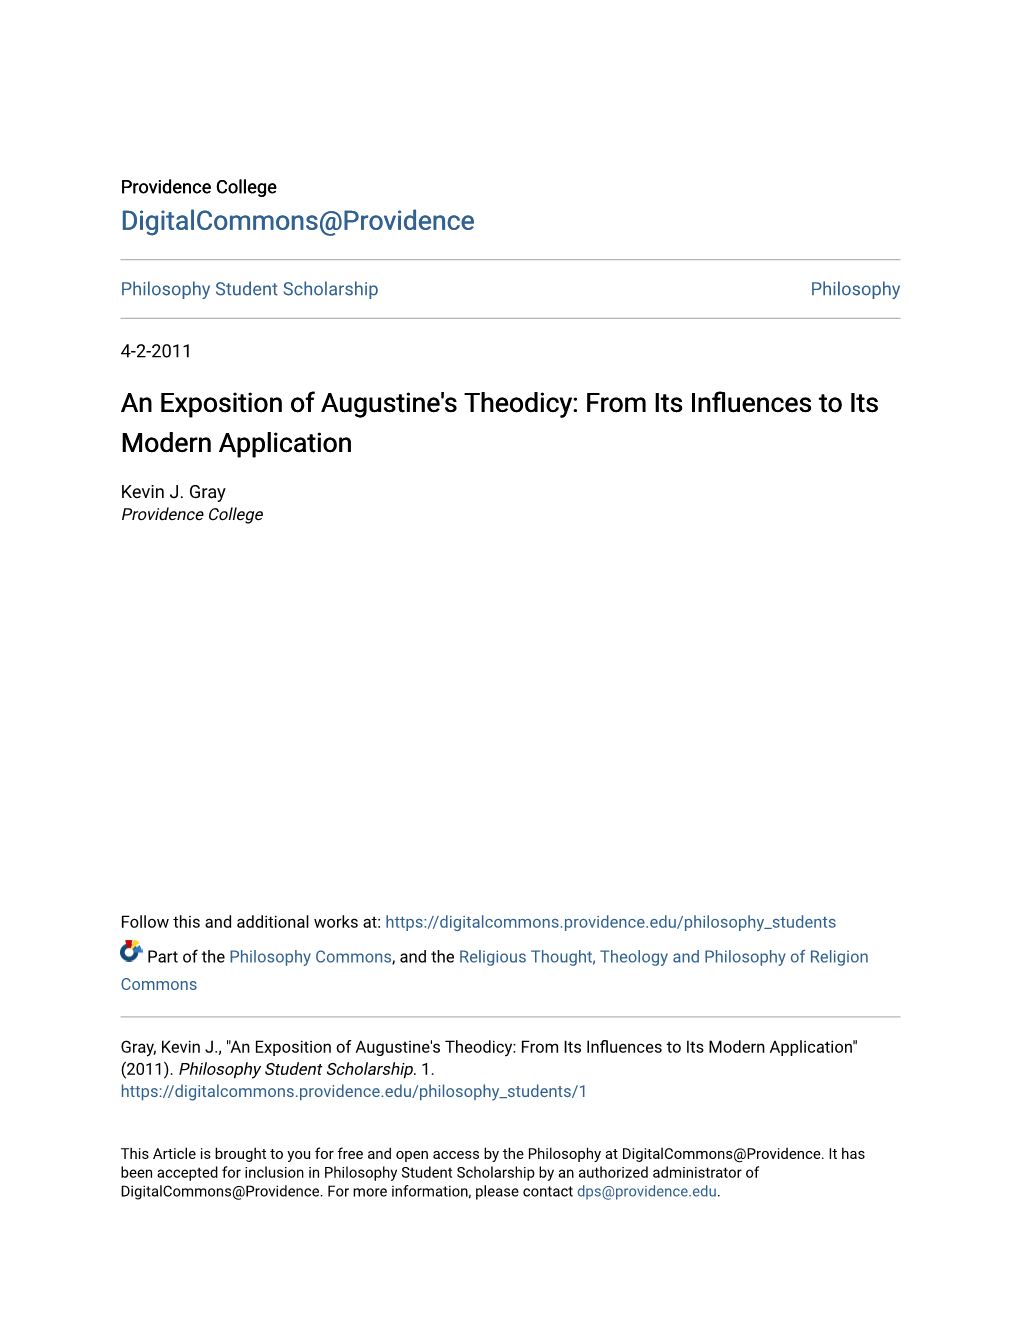 An Exposition of Augustine's Theodicy: from Its Influences Ot Its Modern Application